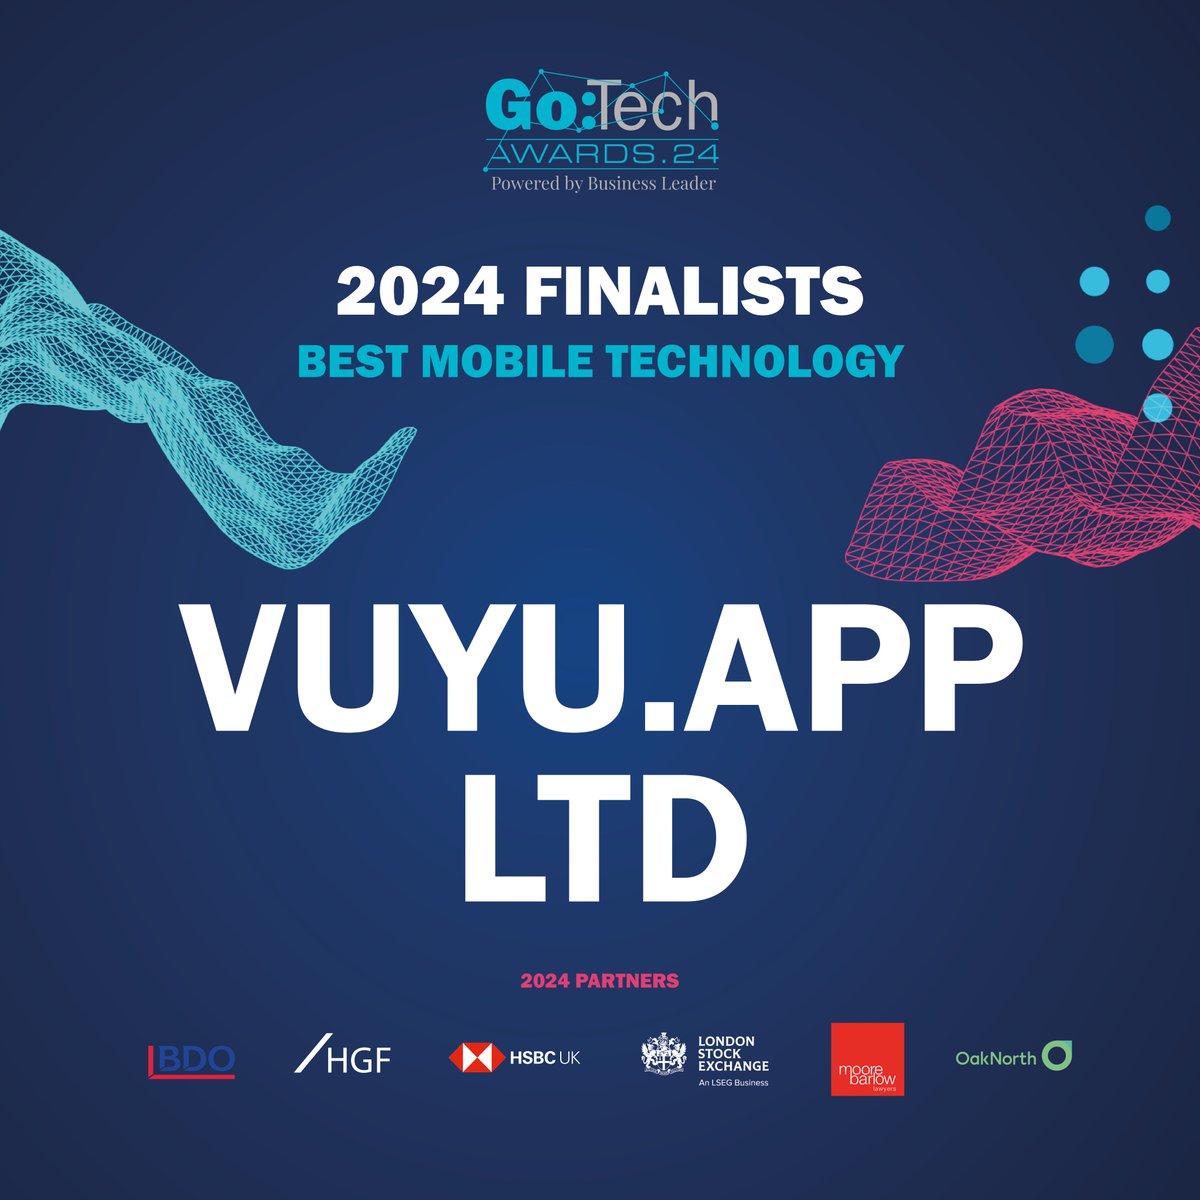 We are thrilled to have been shortlisted for the ‘Best Mobile Technology Award’ at the Go Tech Awards 🏆 

Go multi-streaming! 👏

#GoTech24 #GoTechAwards #LiveStreaming #MultiStreaming